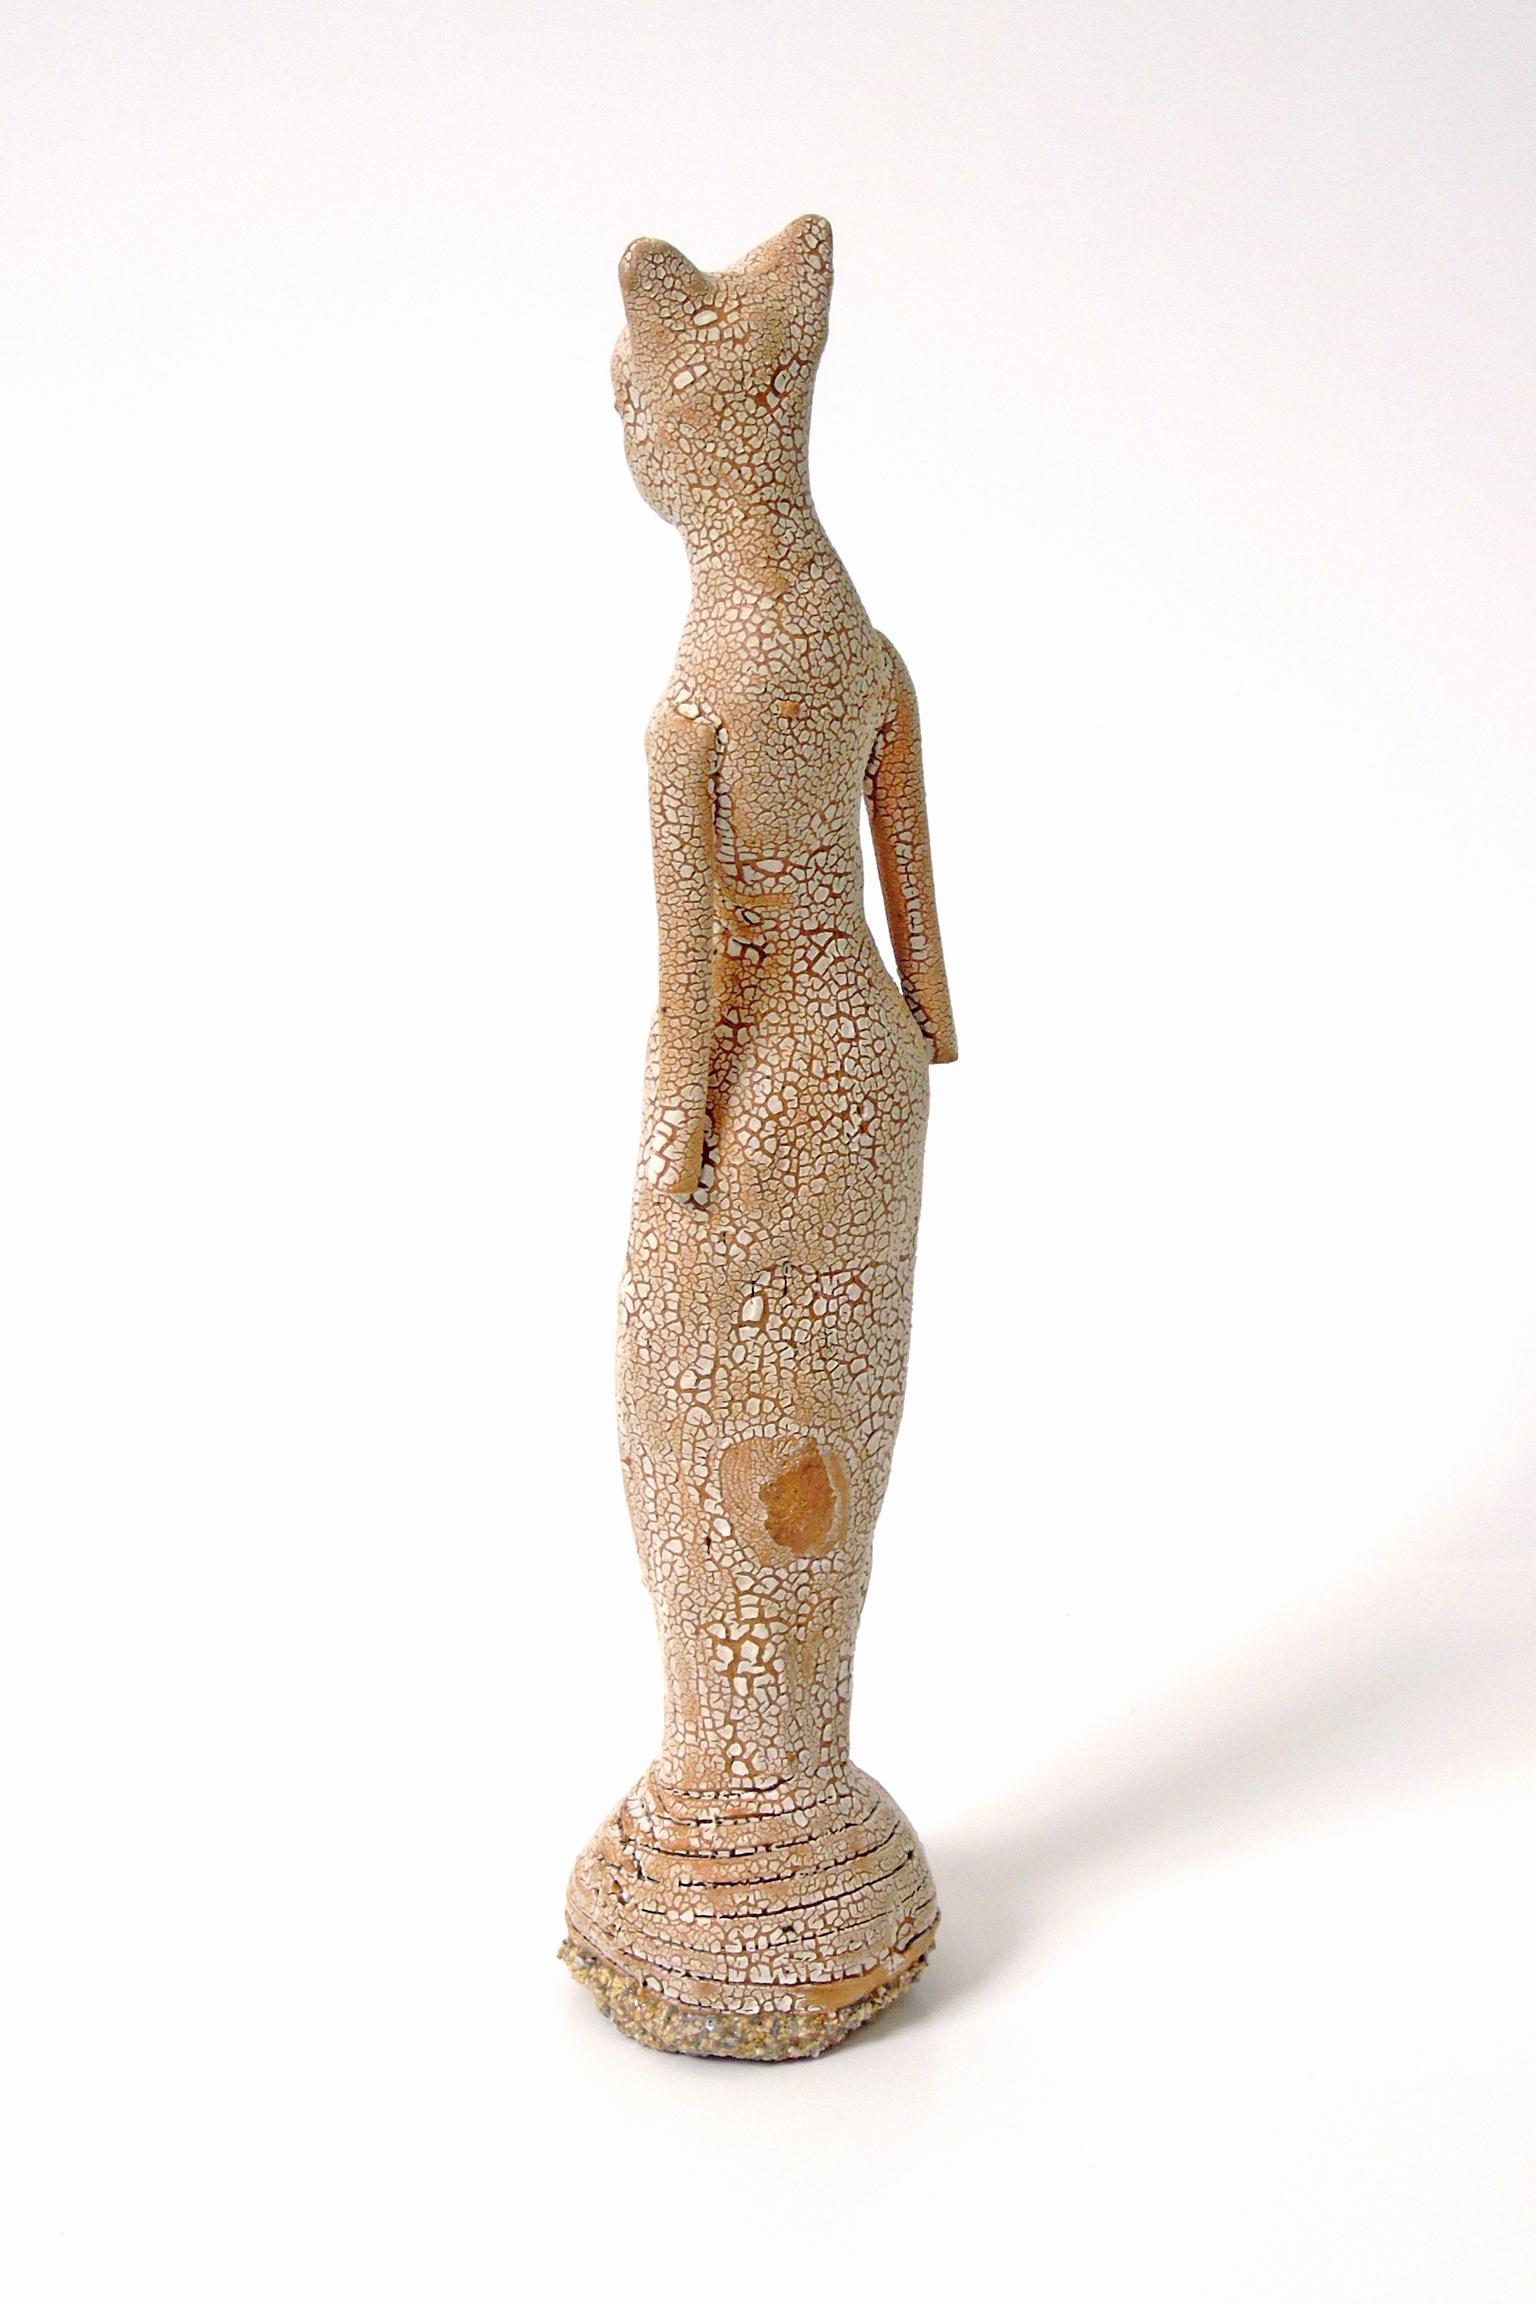 Tiny Cat Totem -93 - Beige Figurative Sculpture by Robin Whiteman